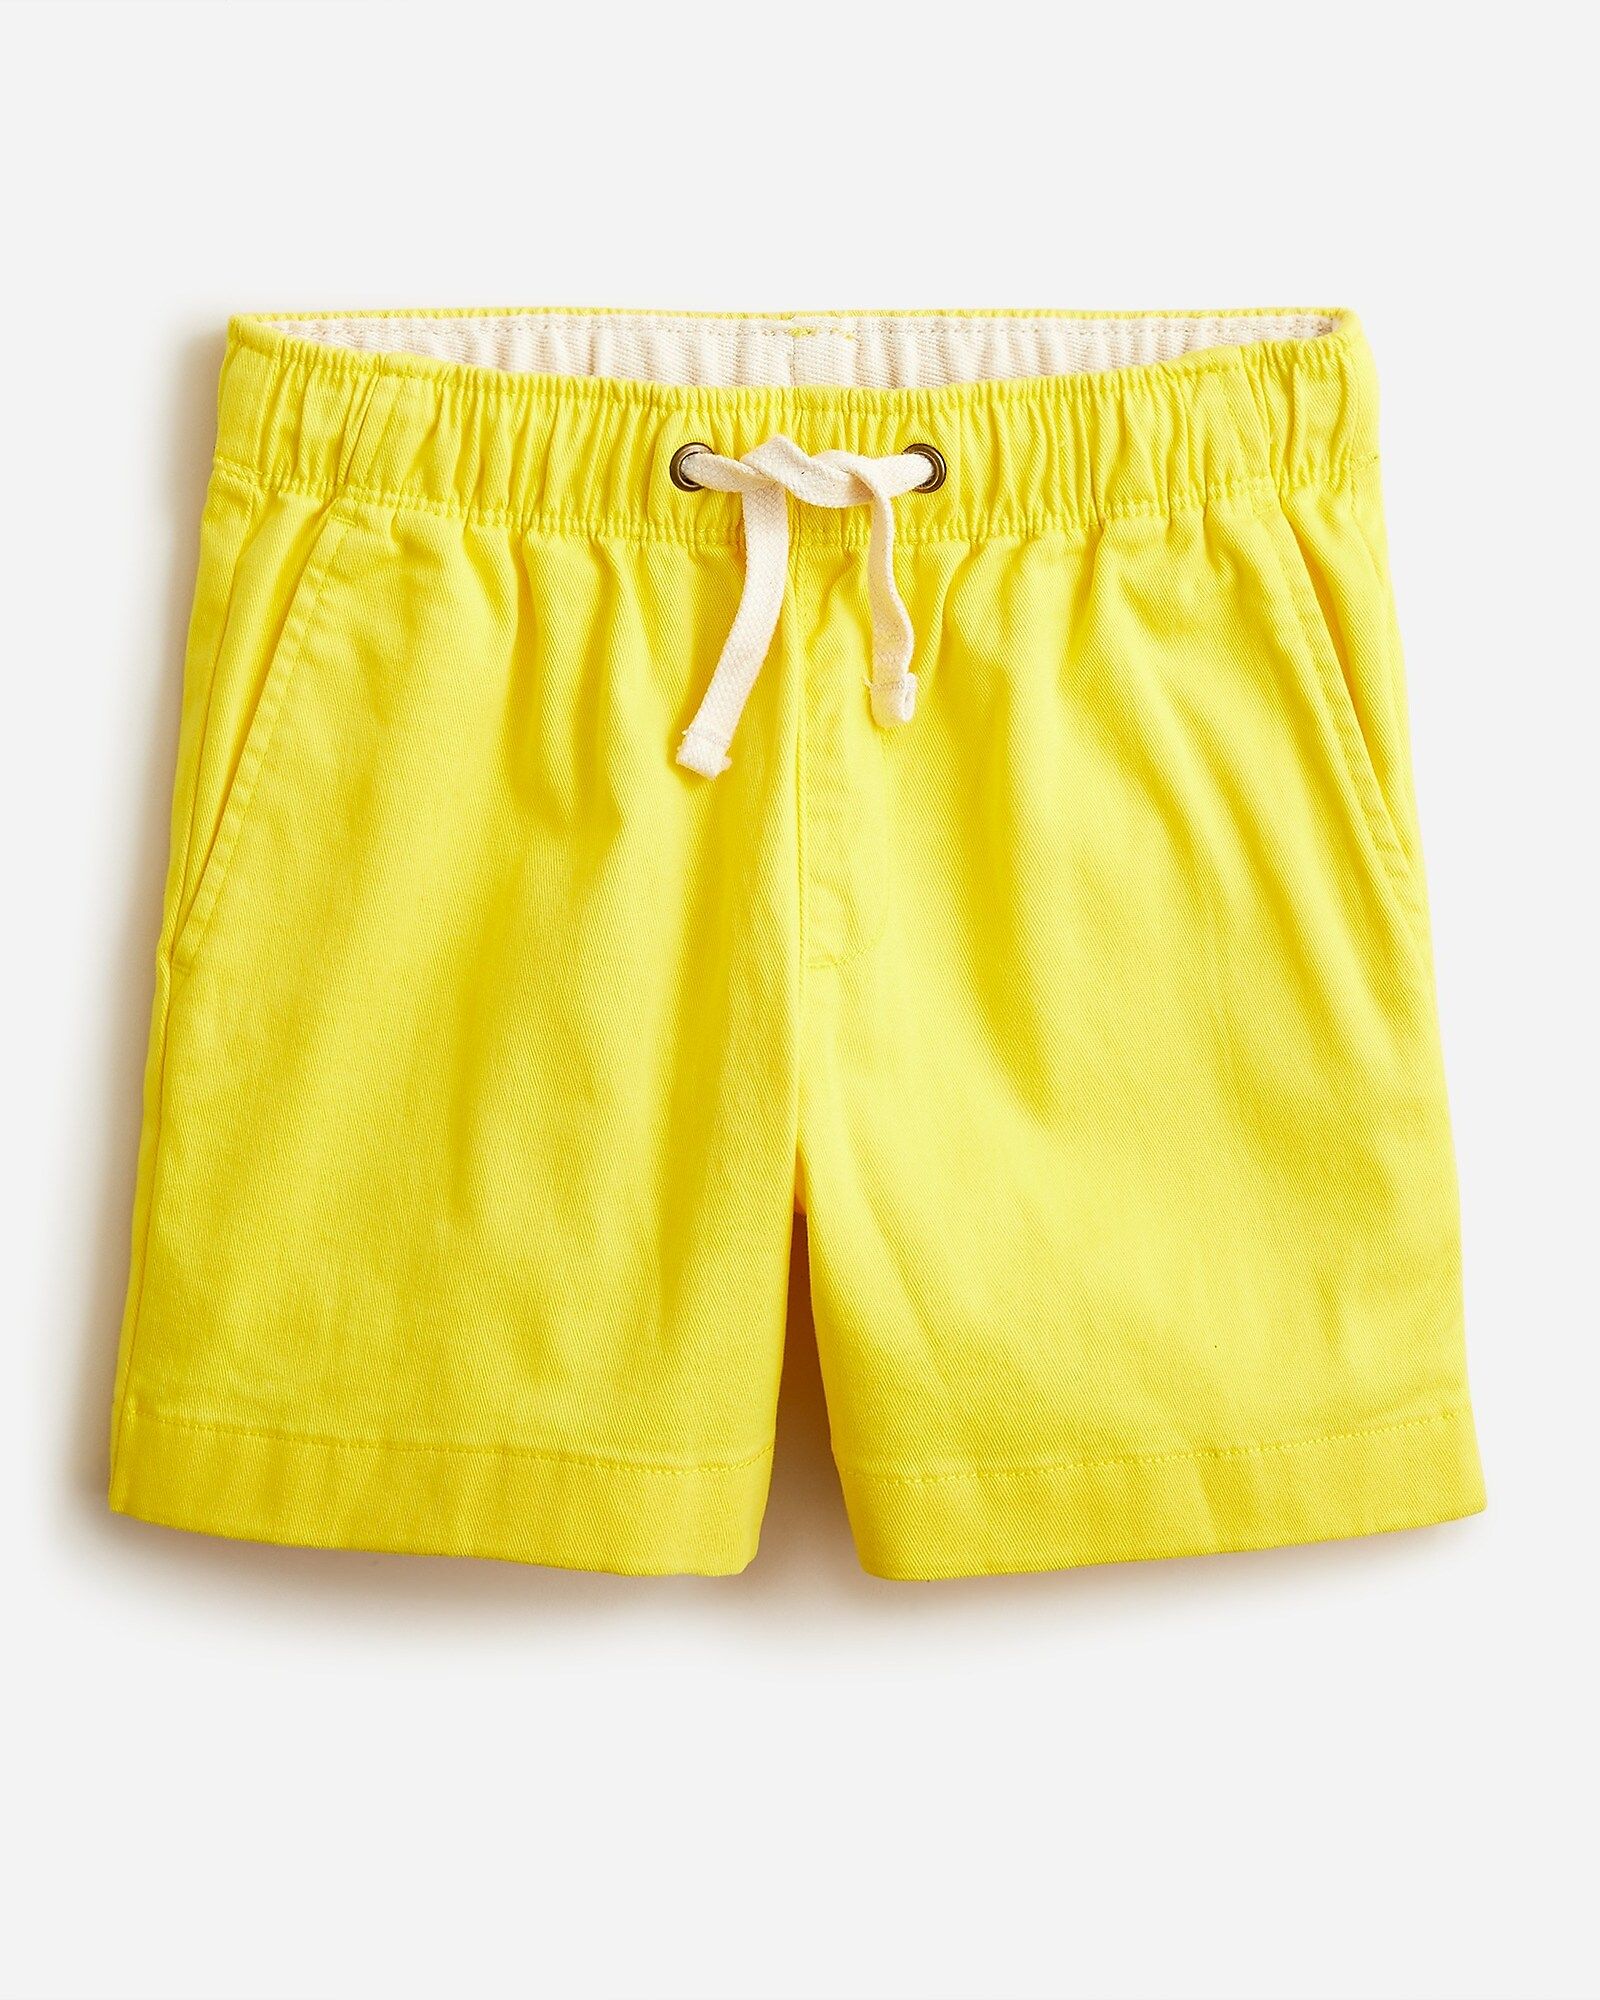 Boys' dock short in midweight stretch chino | J.Crew US